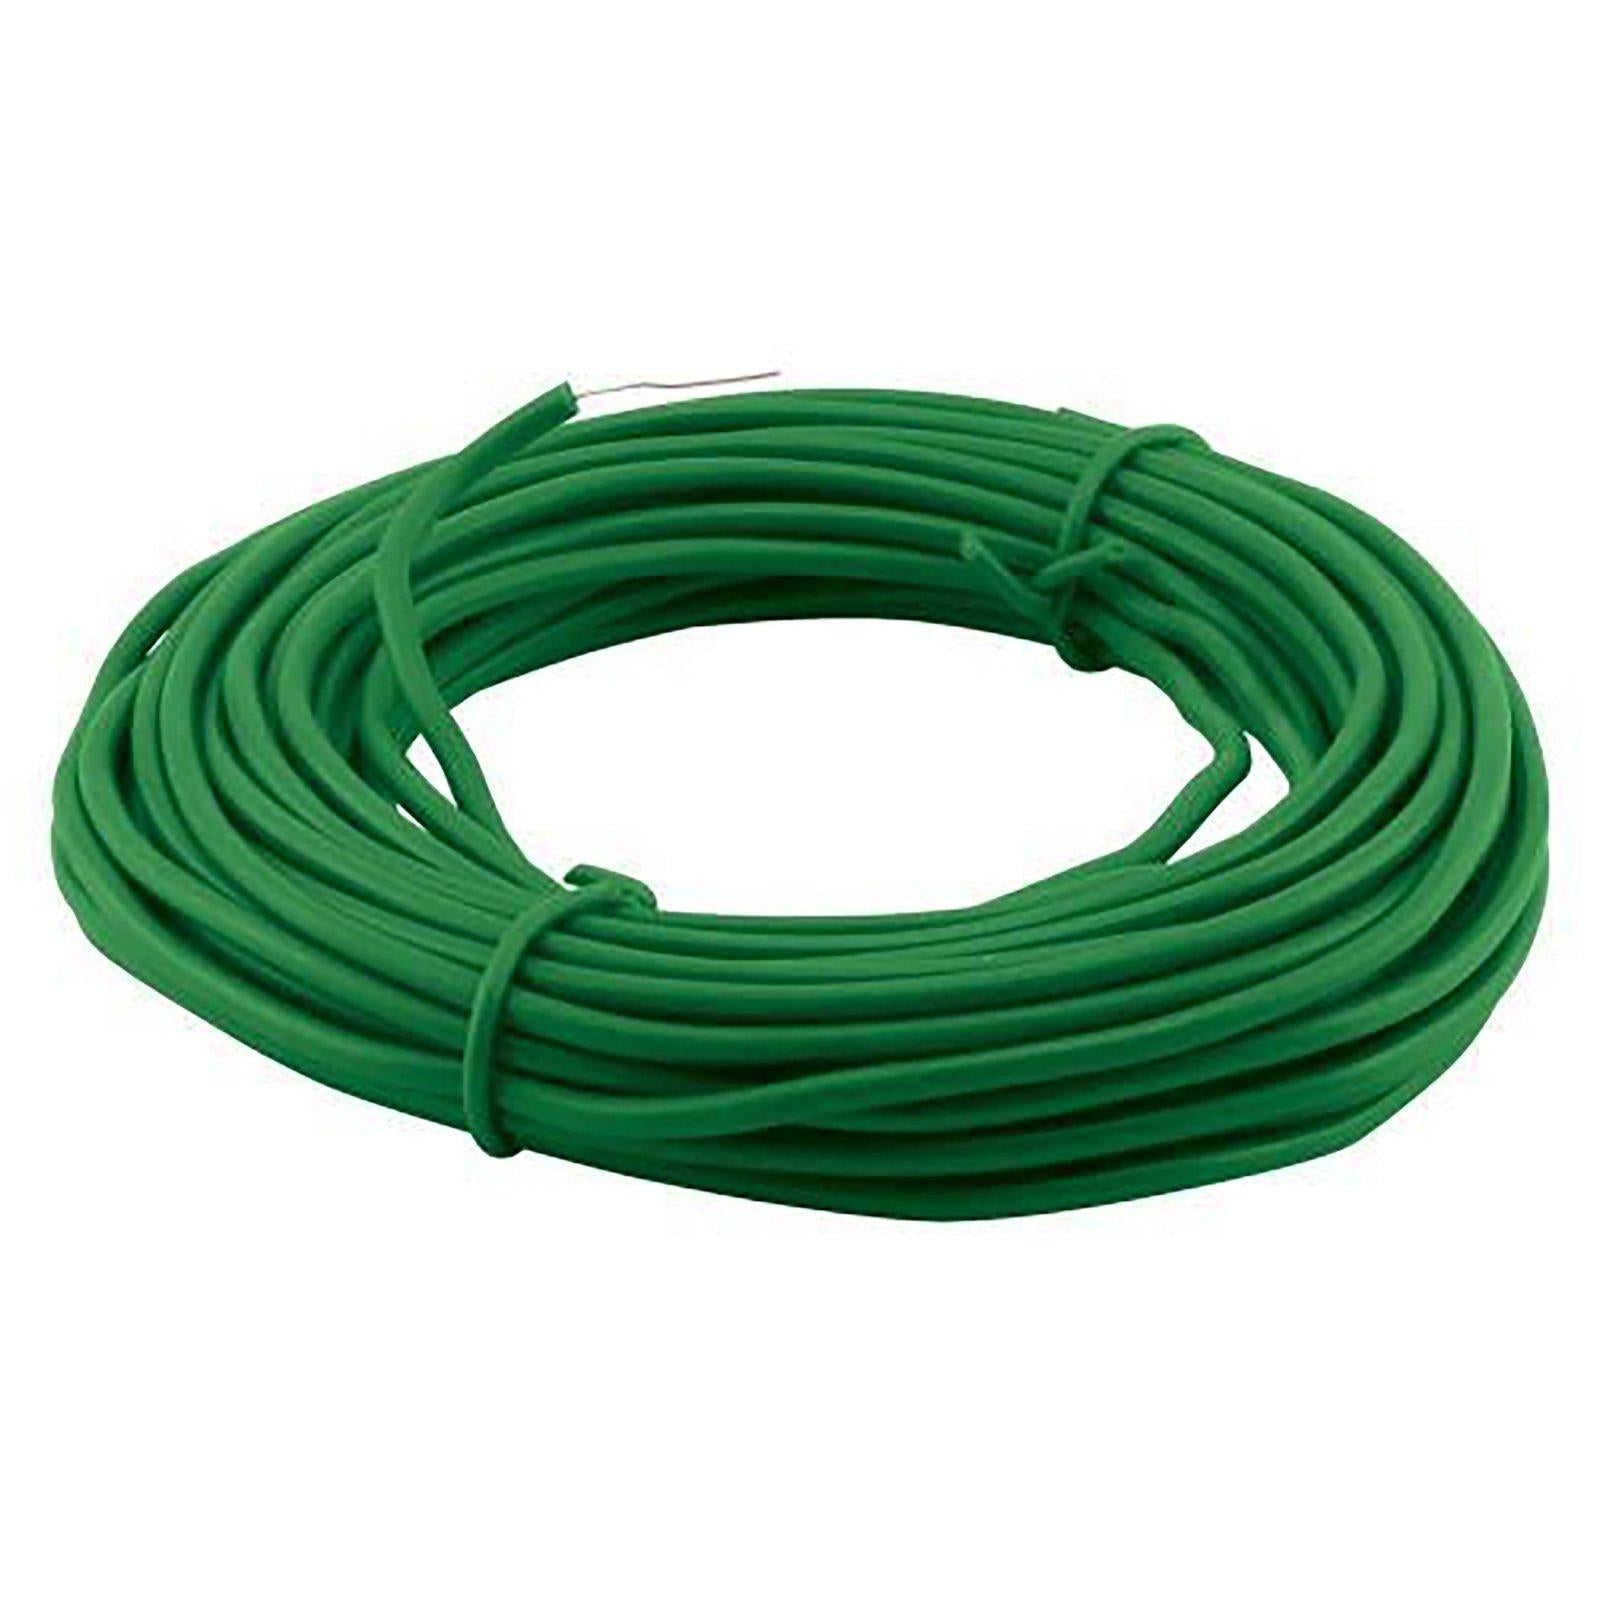 Pack of Gentle Plant Wire Ties - Foam - for Attaching Plants to